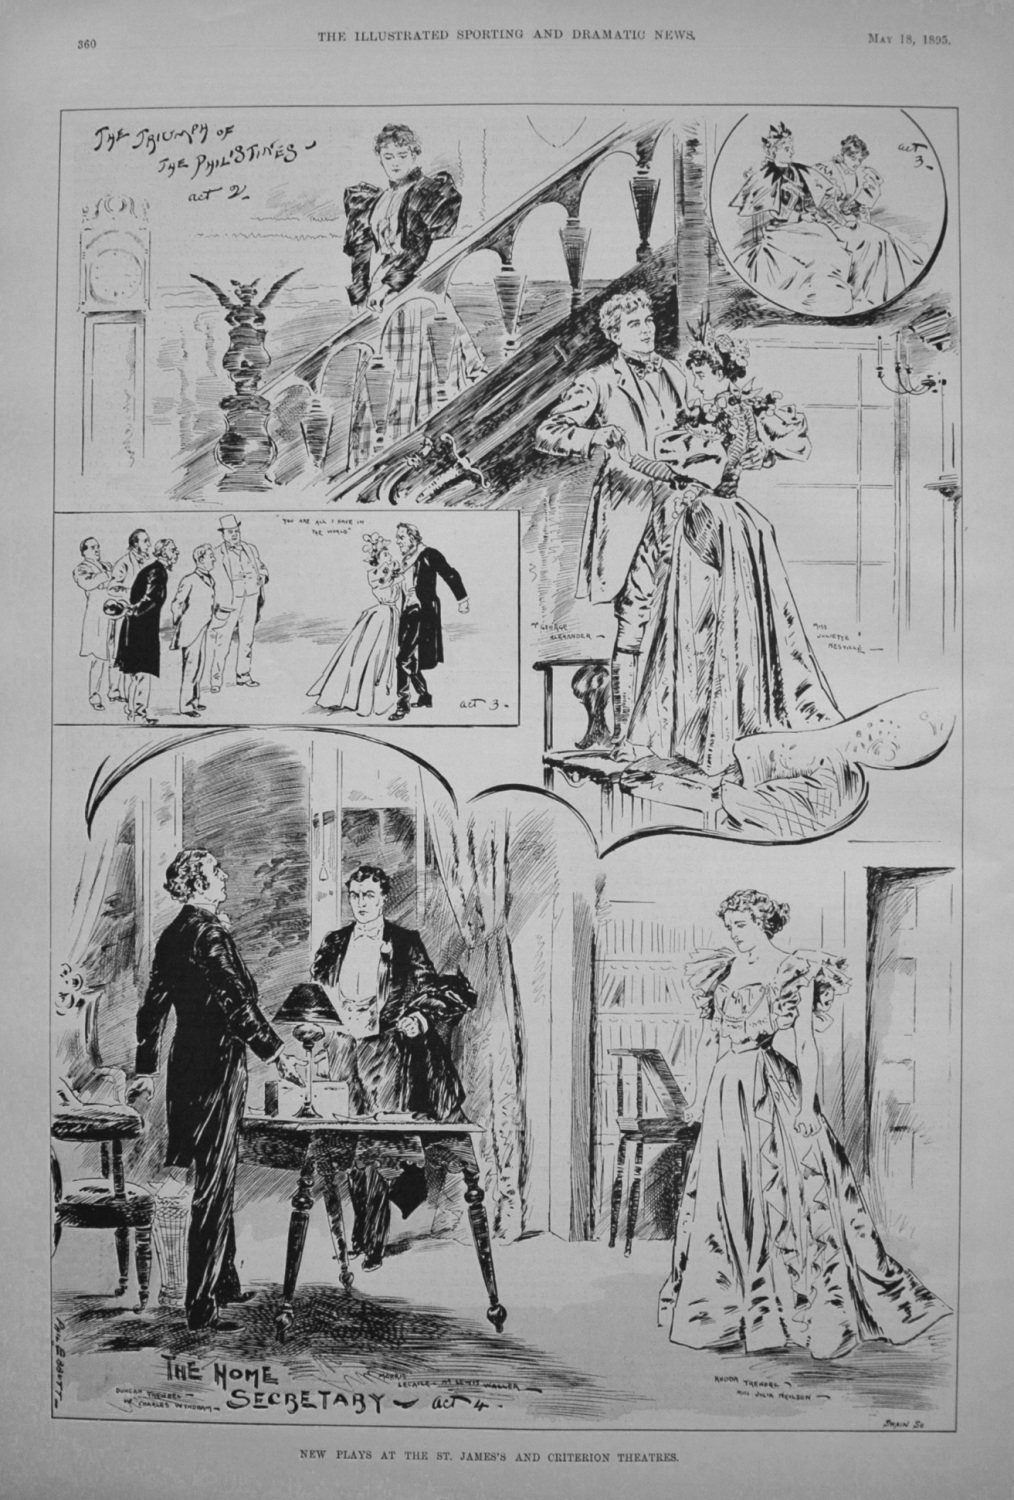 New Plays at the St. James's and Criterion Theatres. 1895